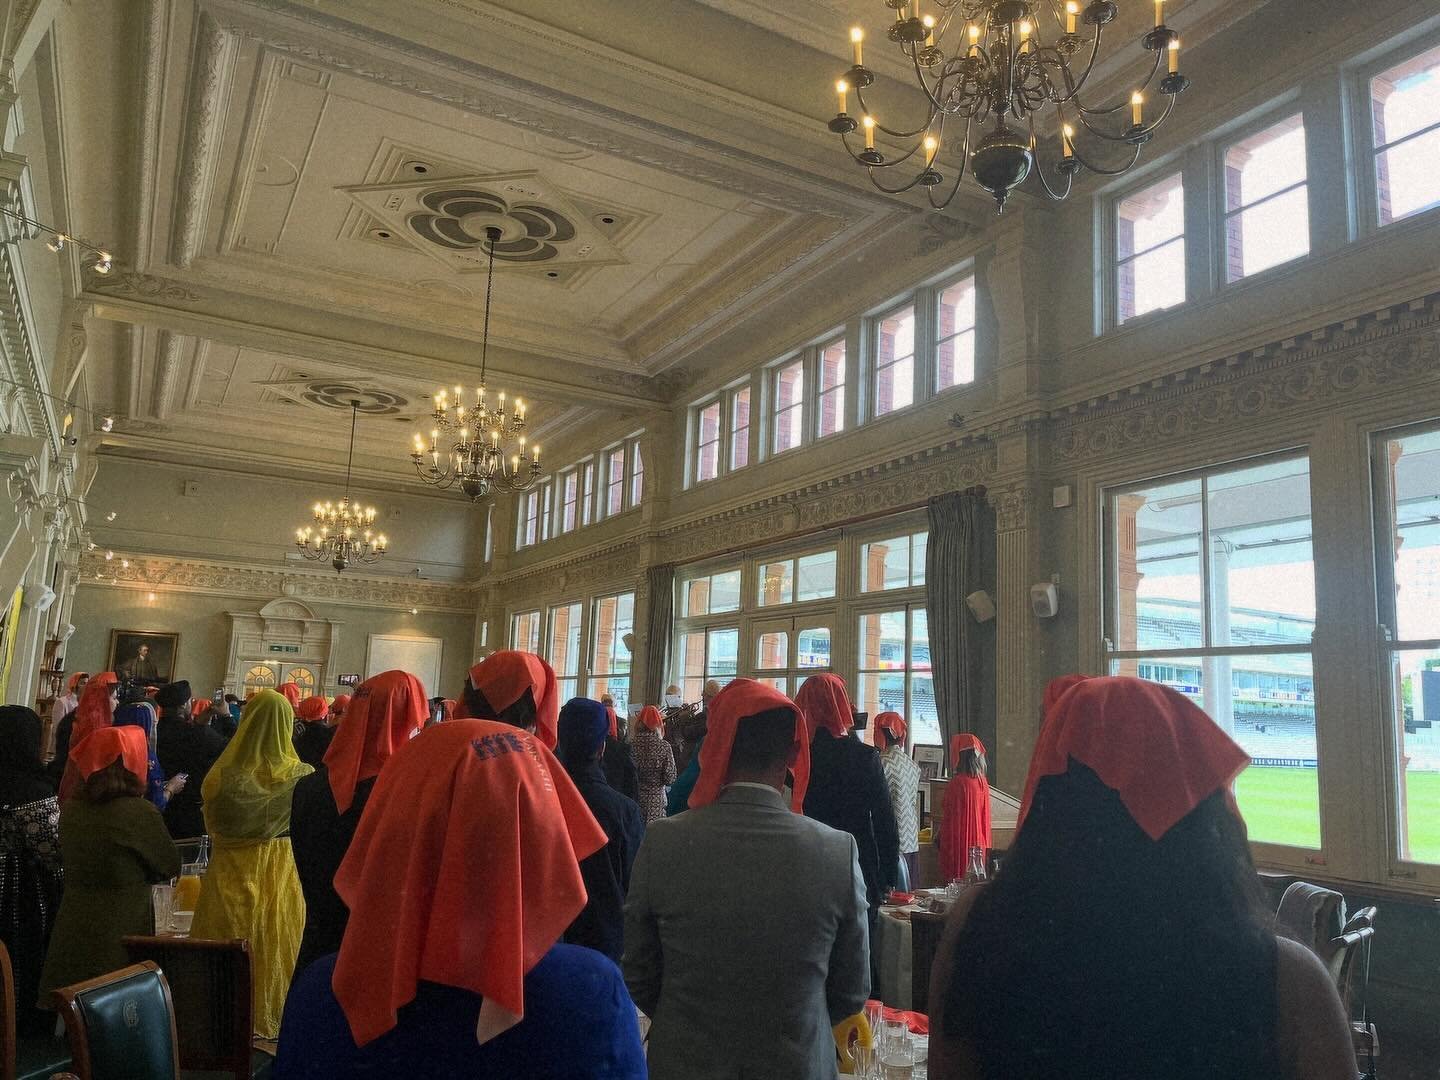 🎉 🌾 🥁 Happy Vaisakhi! 🎉 🌾 🥁 

Sport brings people together in a way that little else can &amp; last night, we had the privilege of attending the #ecbvaisakhi celebrations at the @homeofcricket. We were able to learn more about the Sikh Celebrat